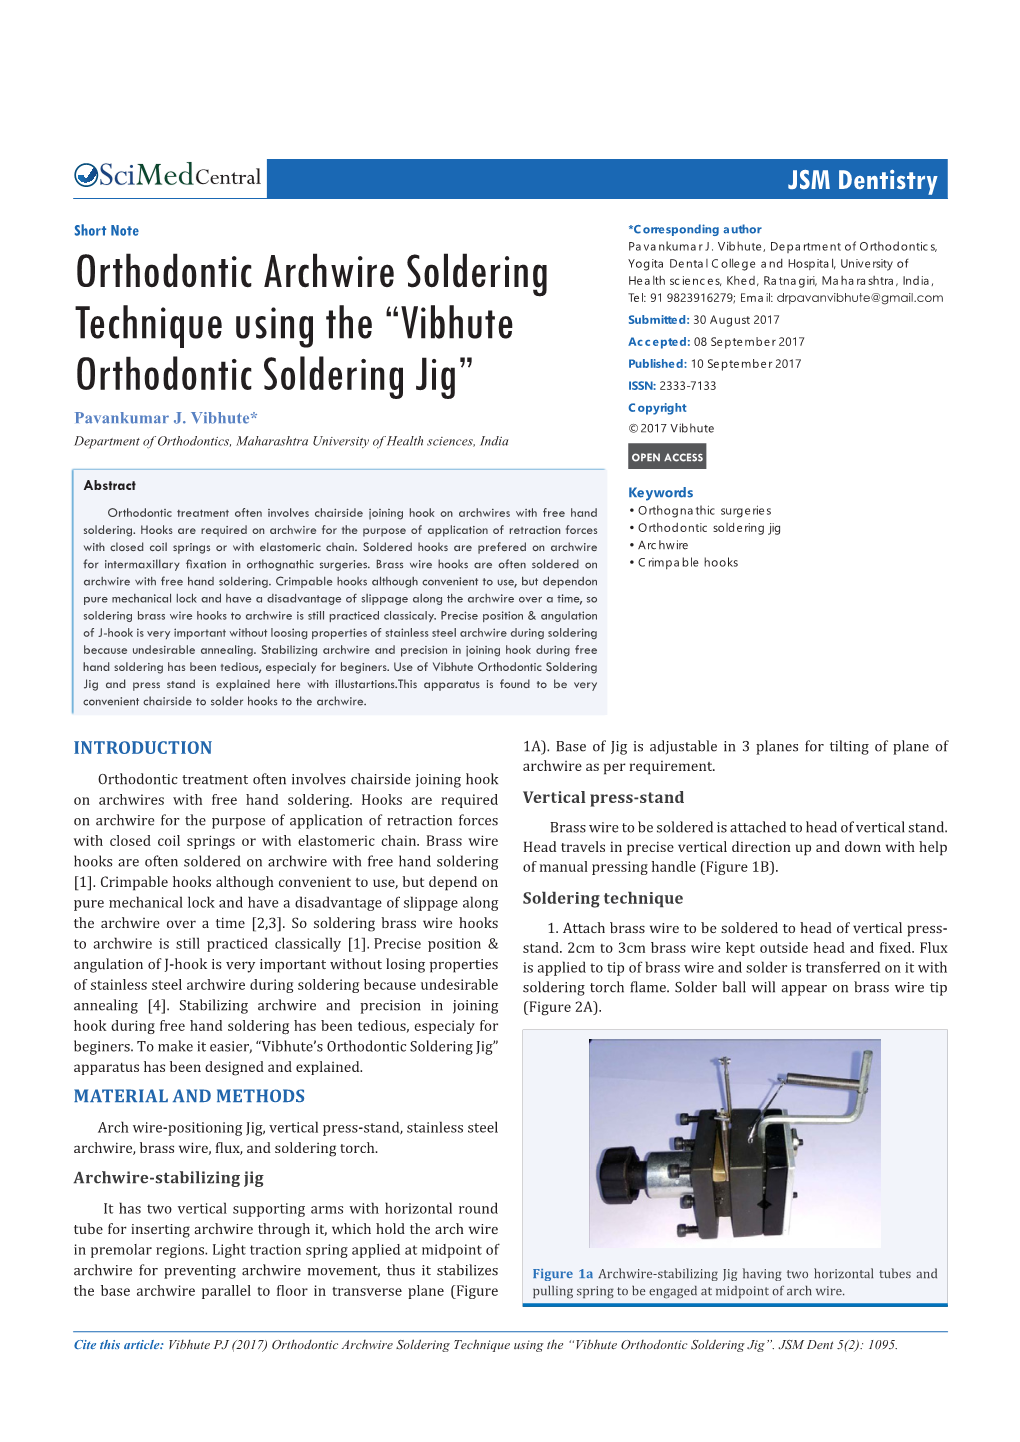 Orthodontic Archwire Soldering Technique Using the “Vibhute Orthodontic Soldering Jig”